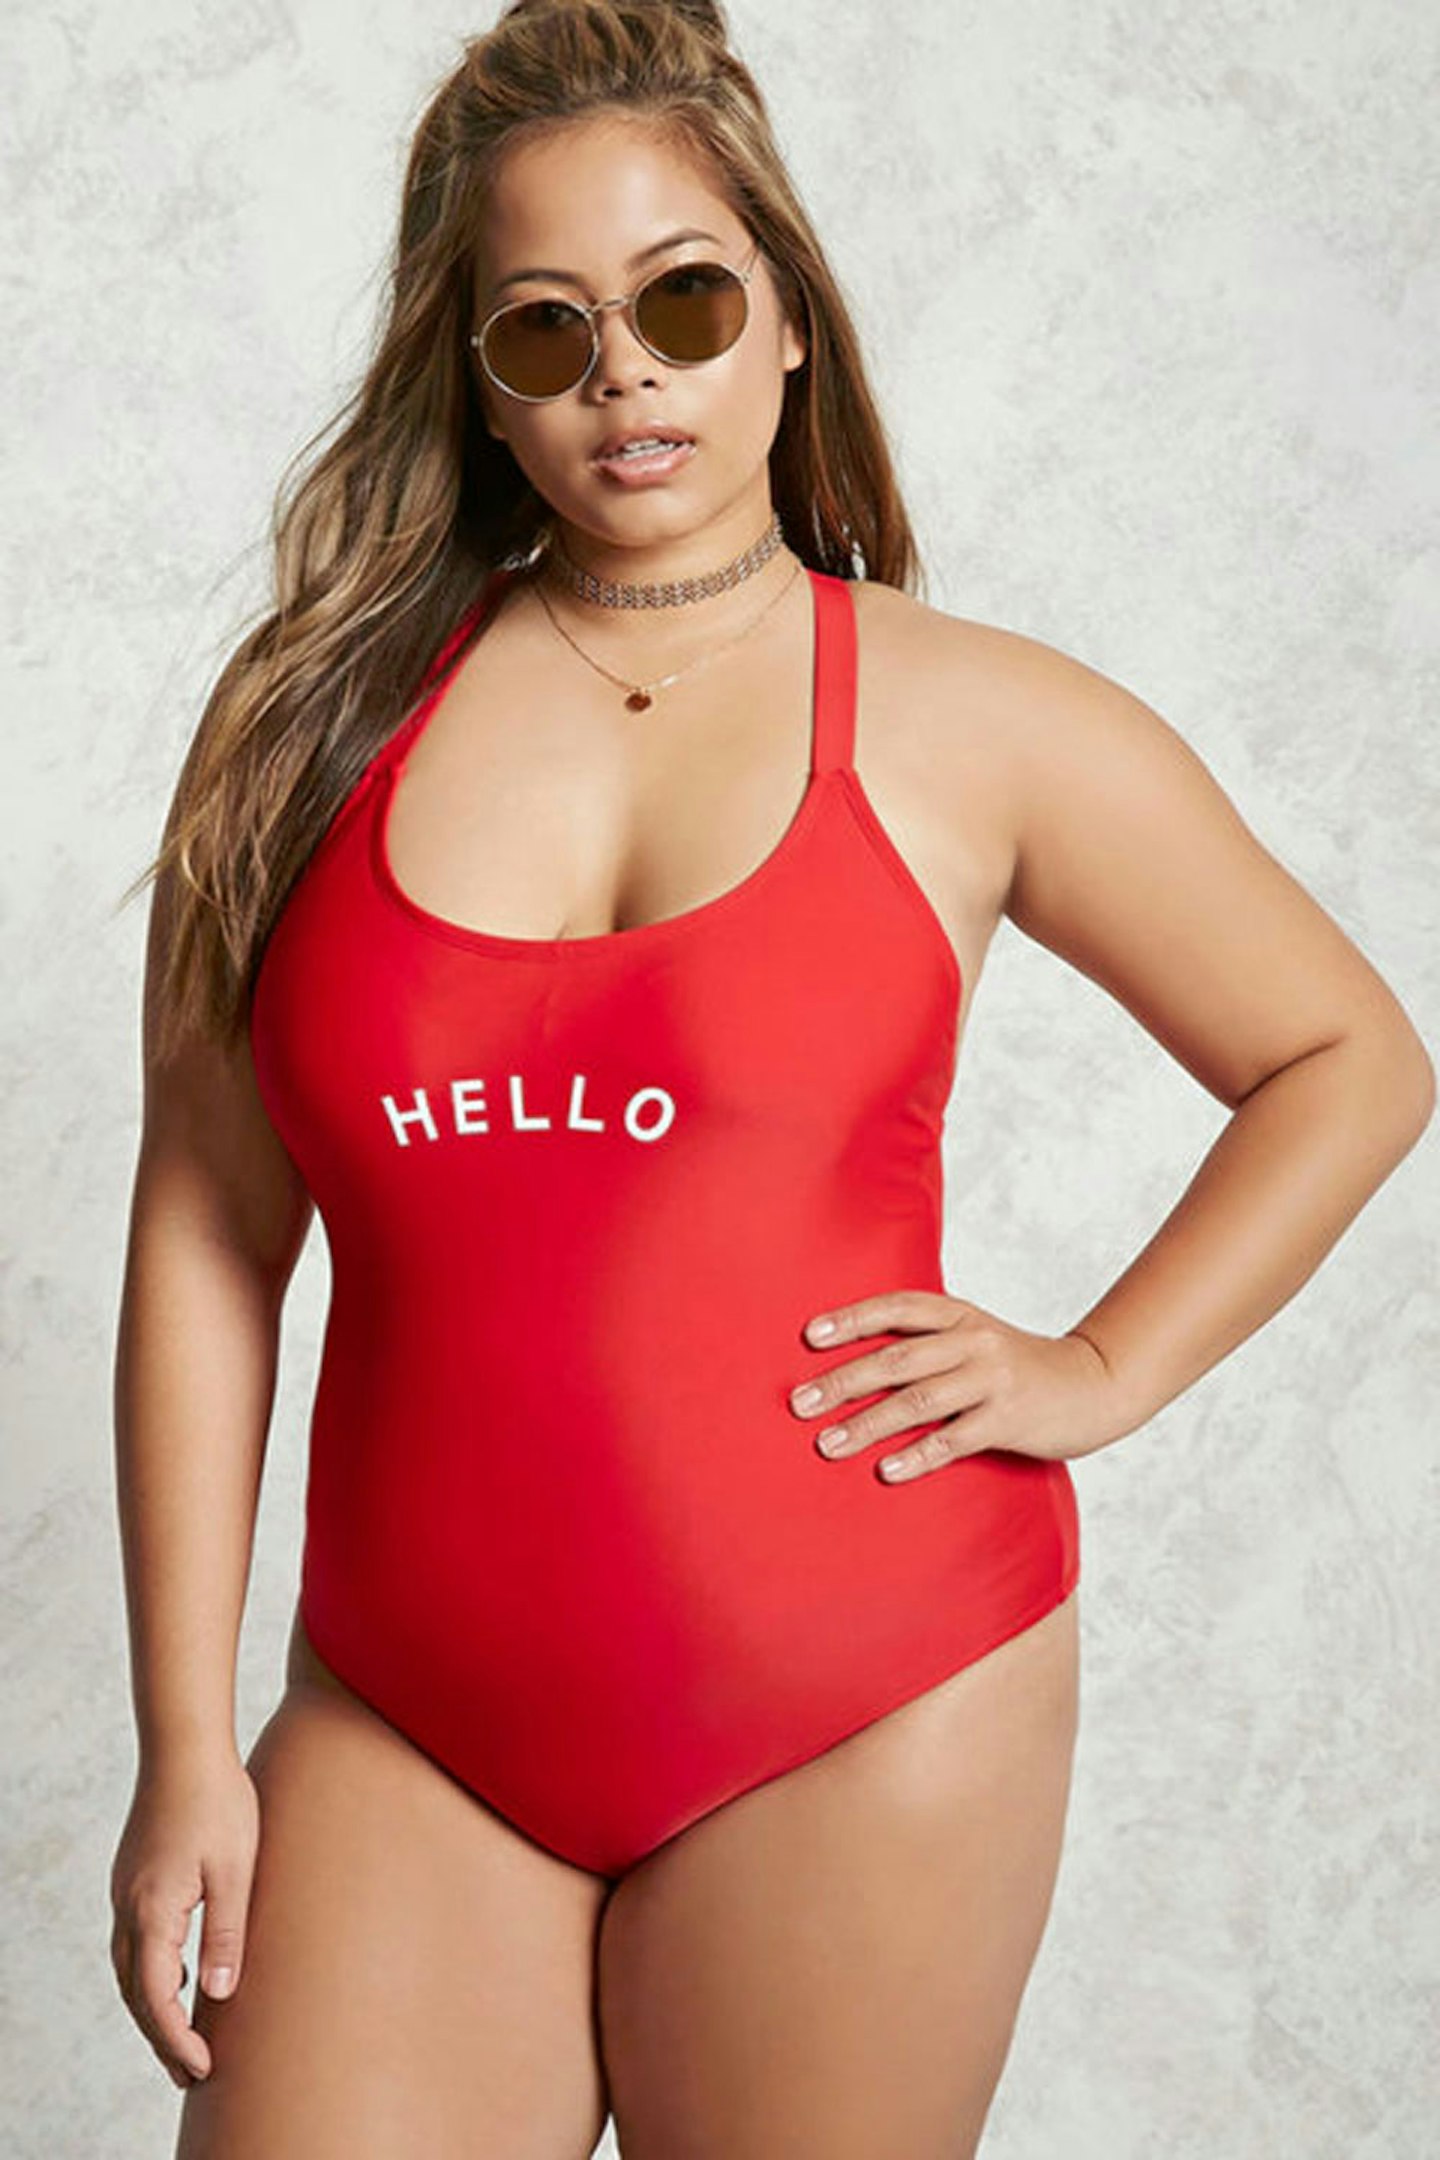 Forever 21 plus size swimwear collection